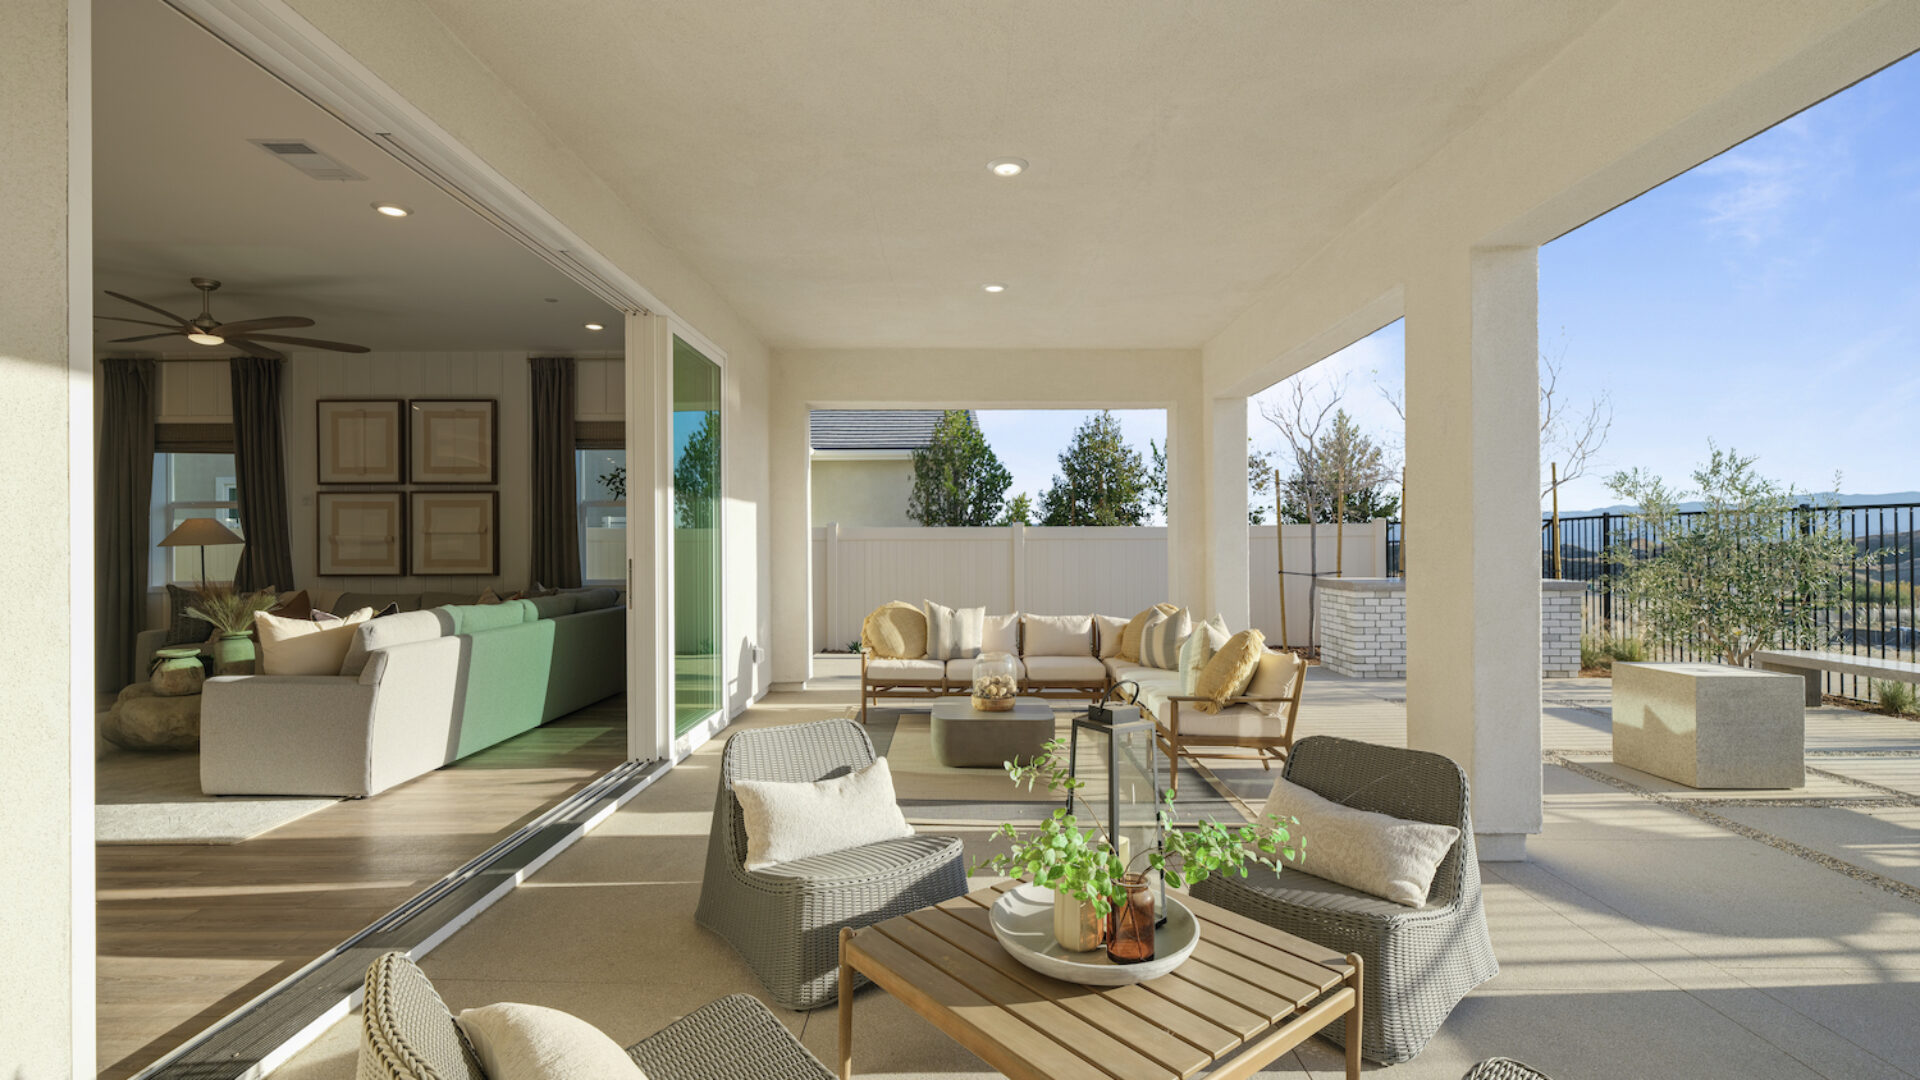 Enjoy outdoor living spaces in new Lennar homes